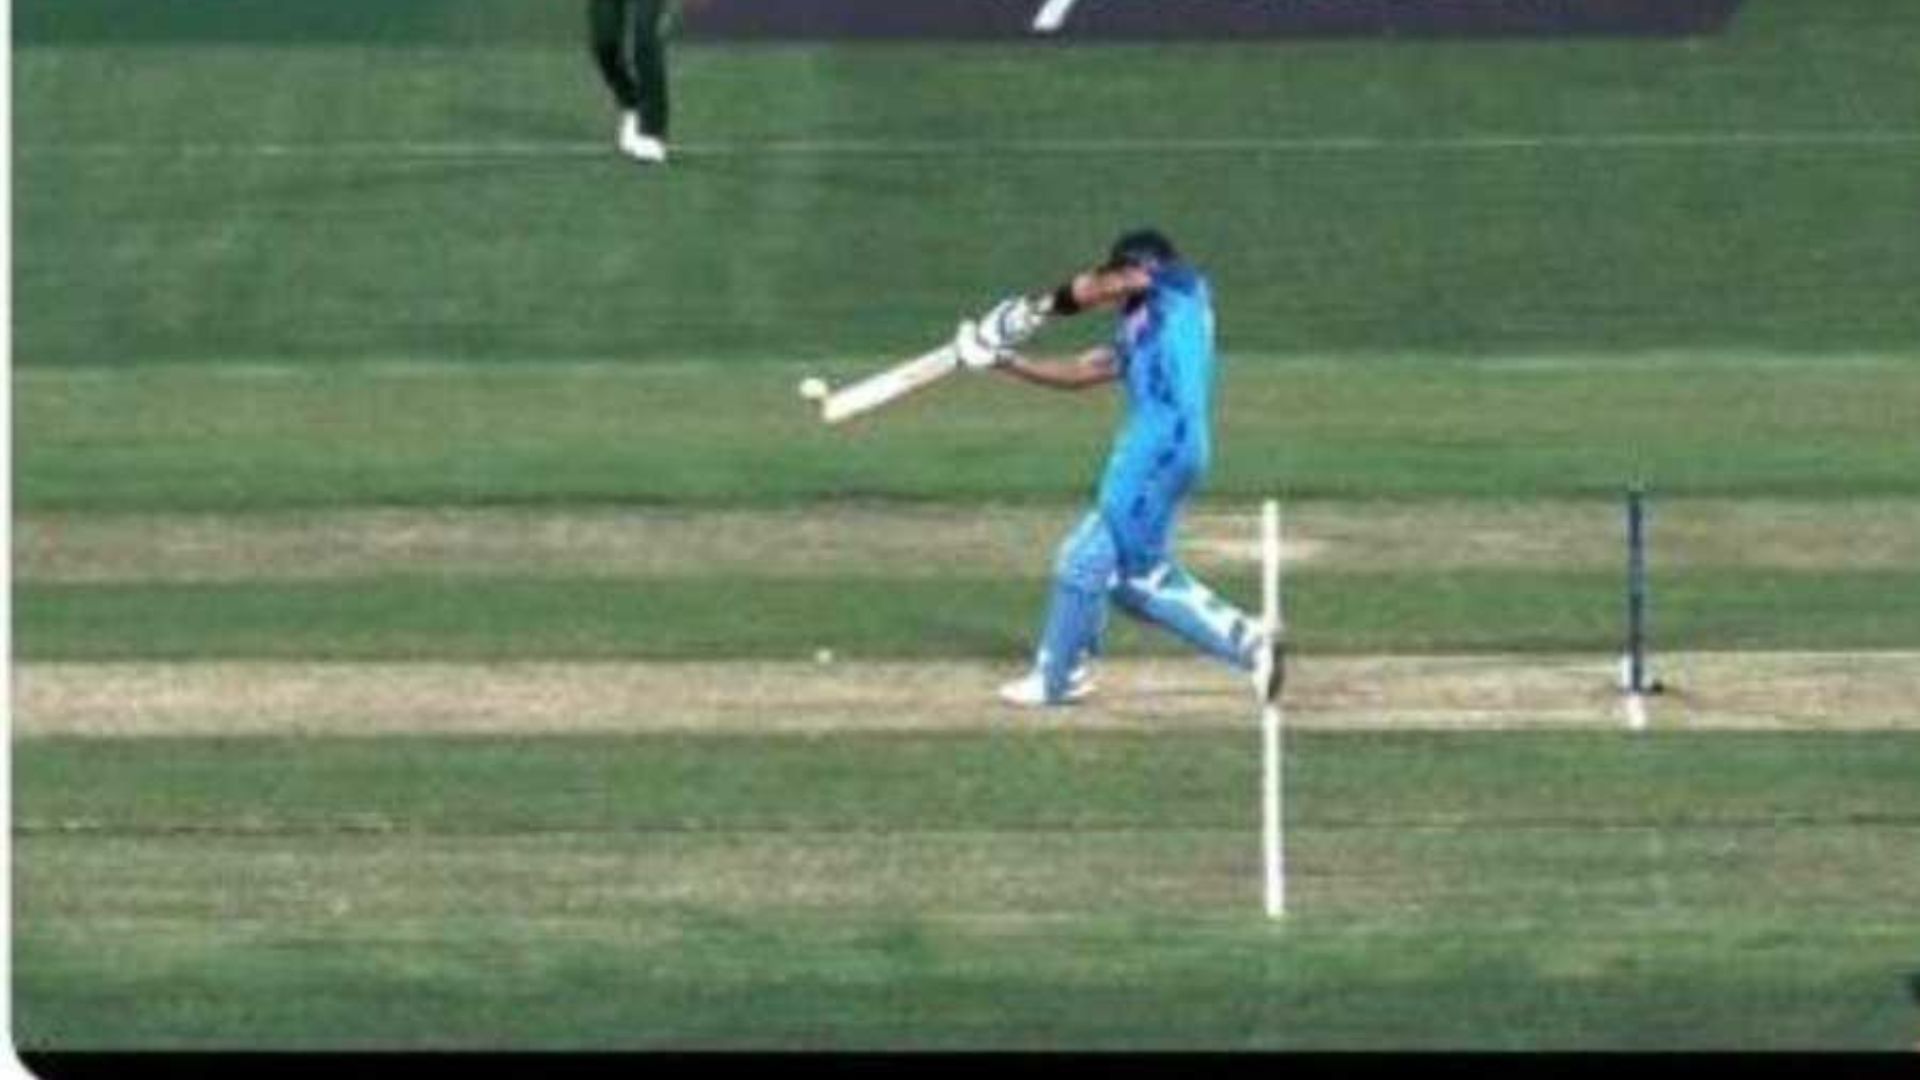 Pakistan players were unhappy with the no-ball call. (P.C.:T20 World Cup)